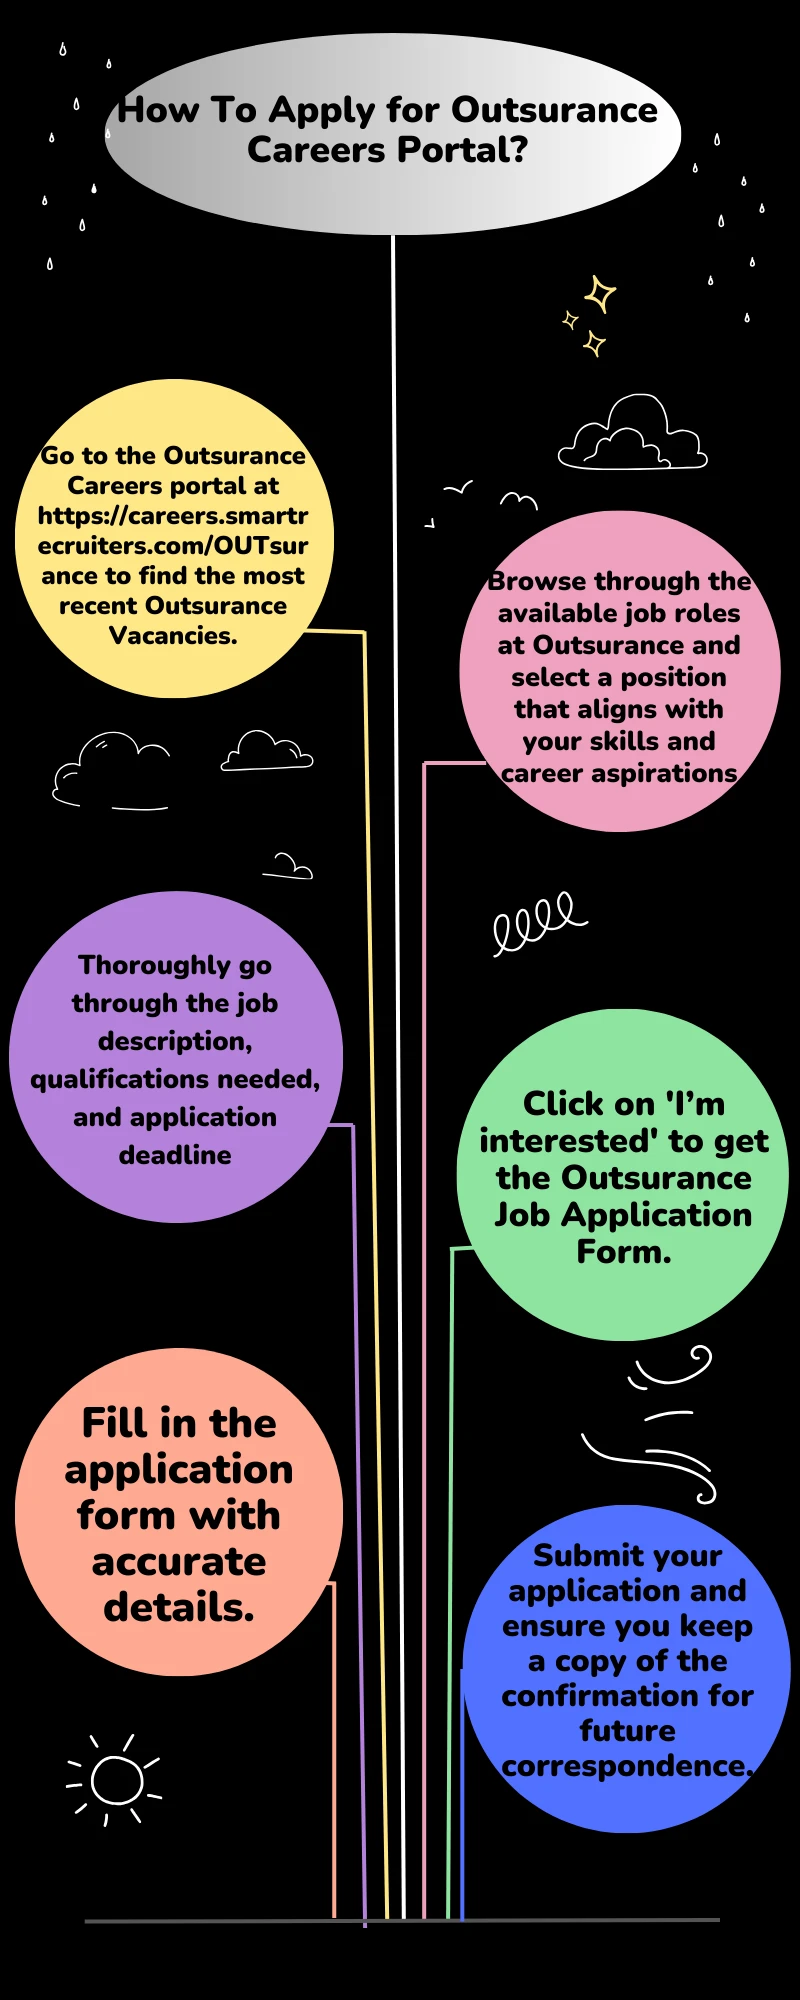 How To Apply for Outsurance Careers Portal